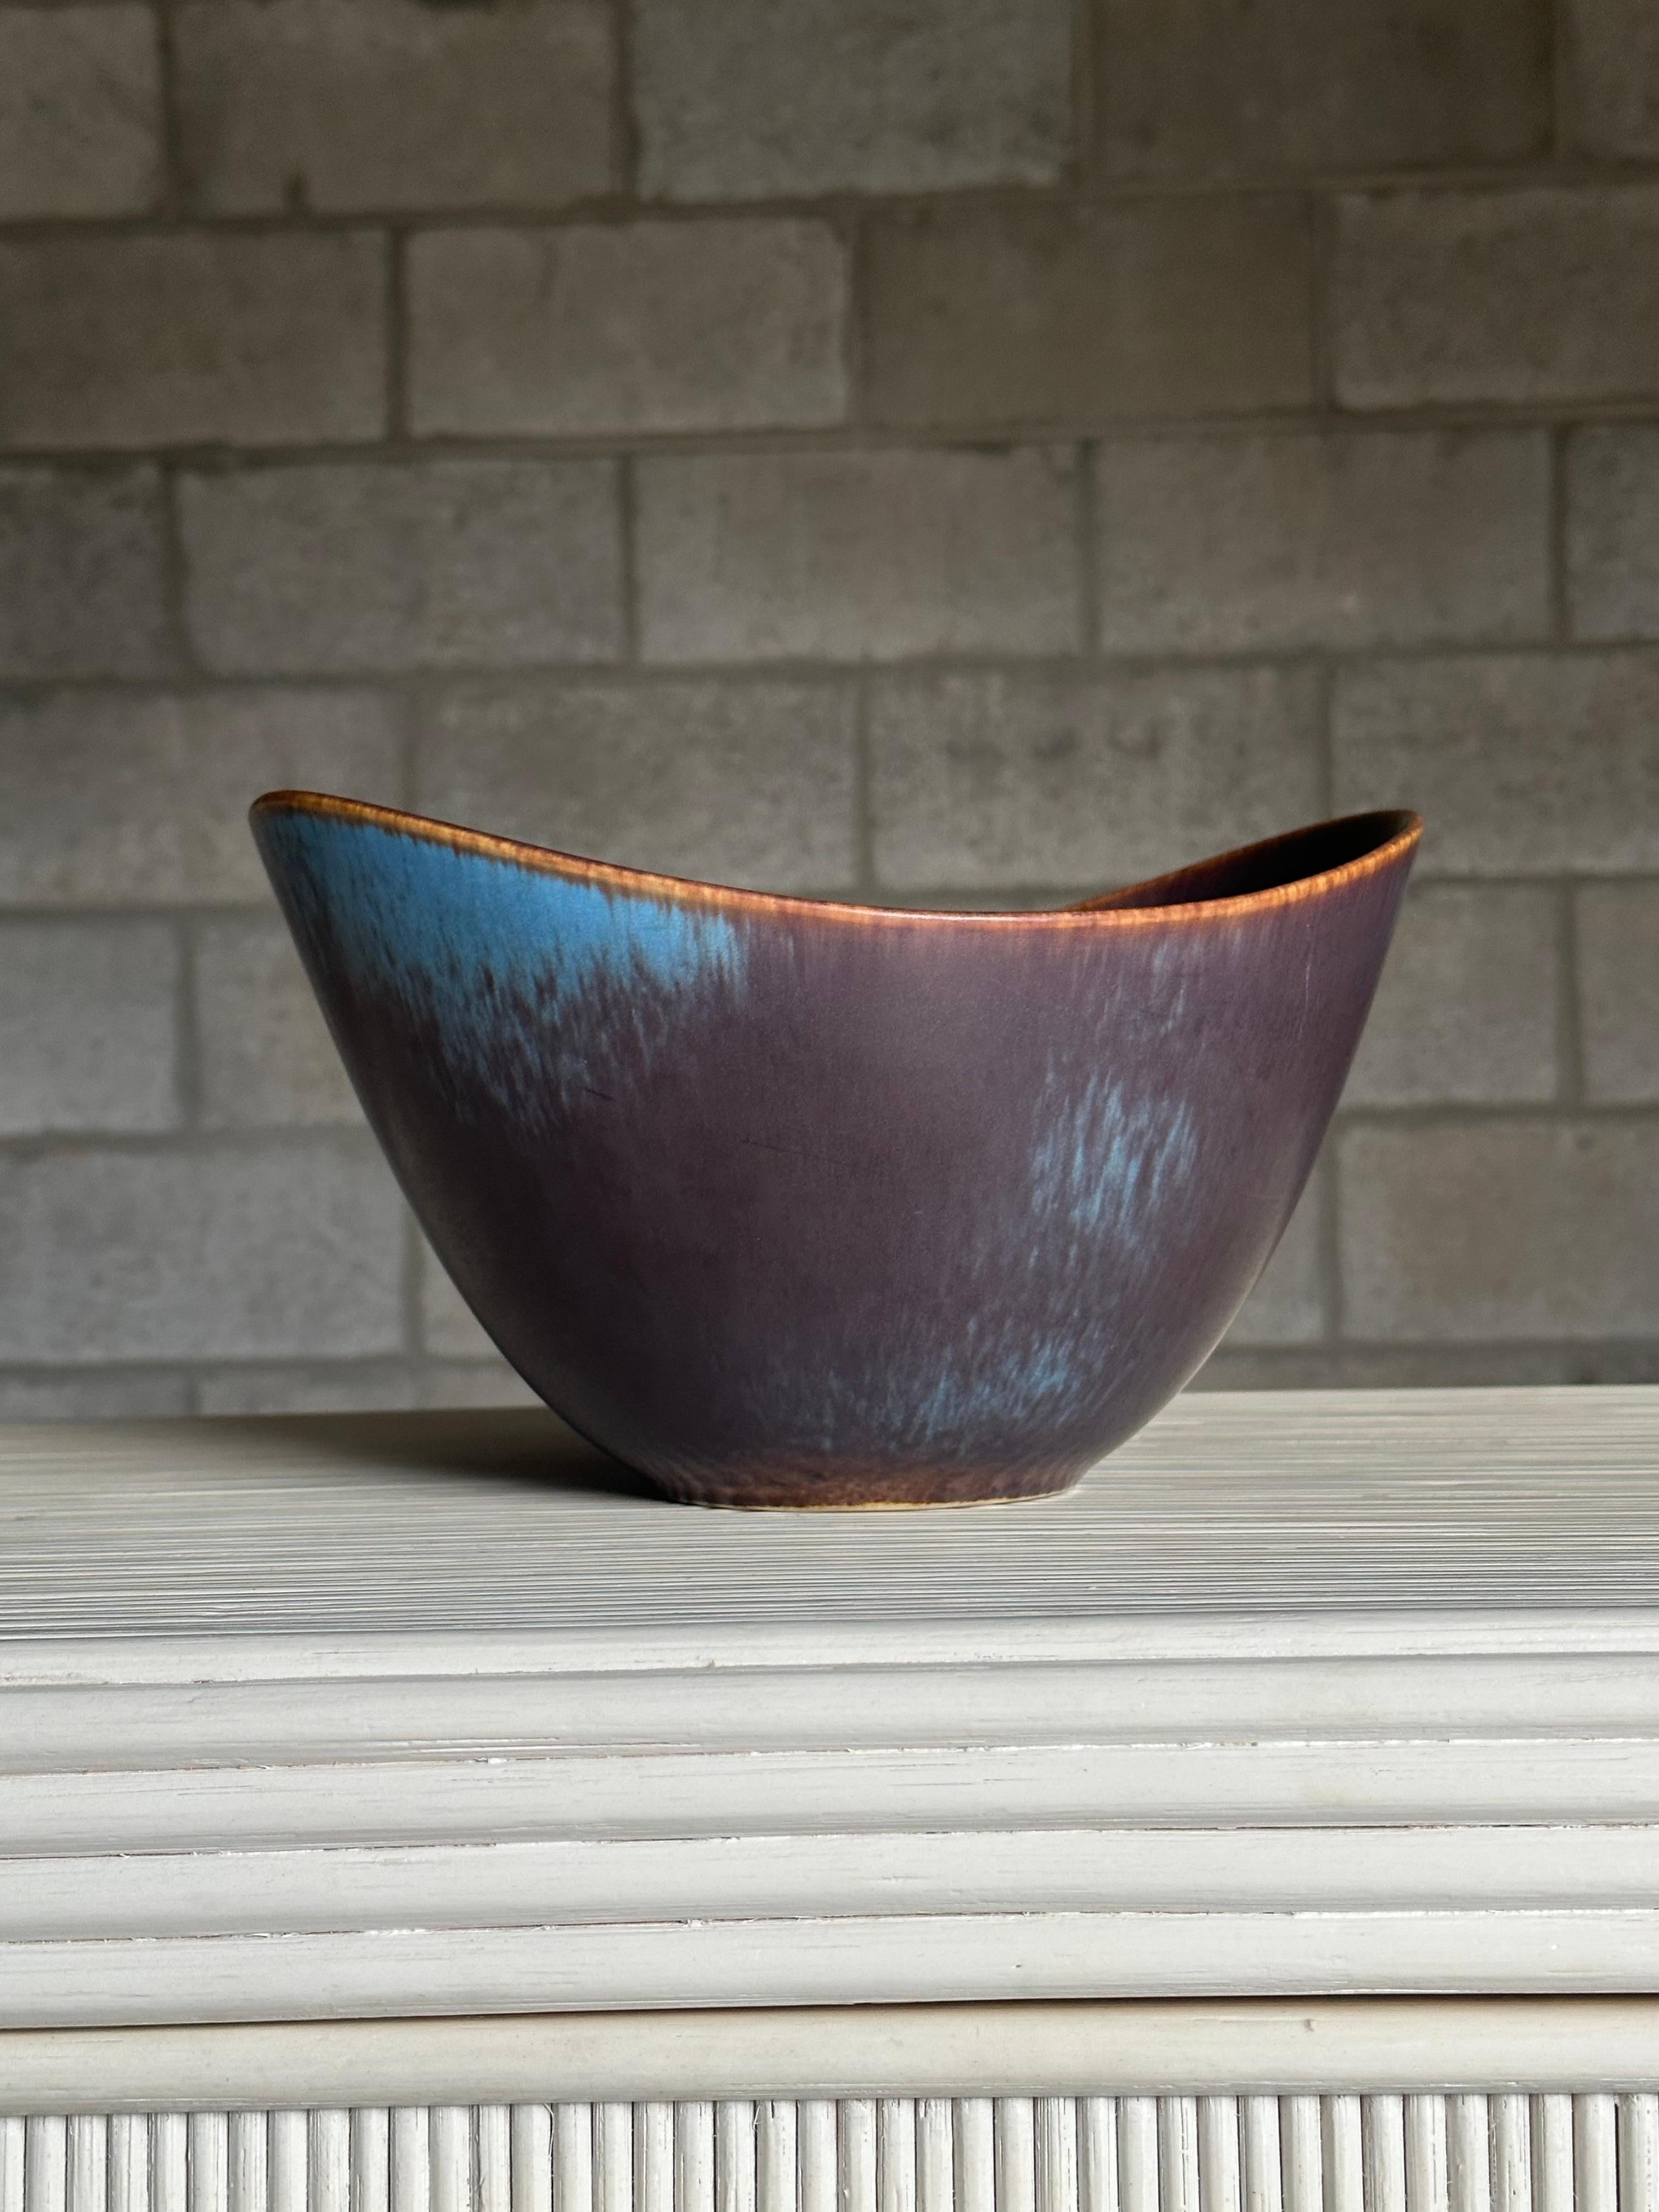 An impressive and large stoneware bowl designed by Gunnar Nylund for Rörstrand. Gorgeous coloring and great scale, the bowl has wonderful movement. Could be used as a fruit bowl, or simply on a shelf. A timeless form and color.